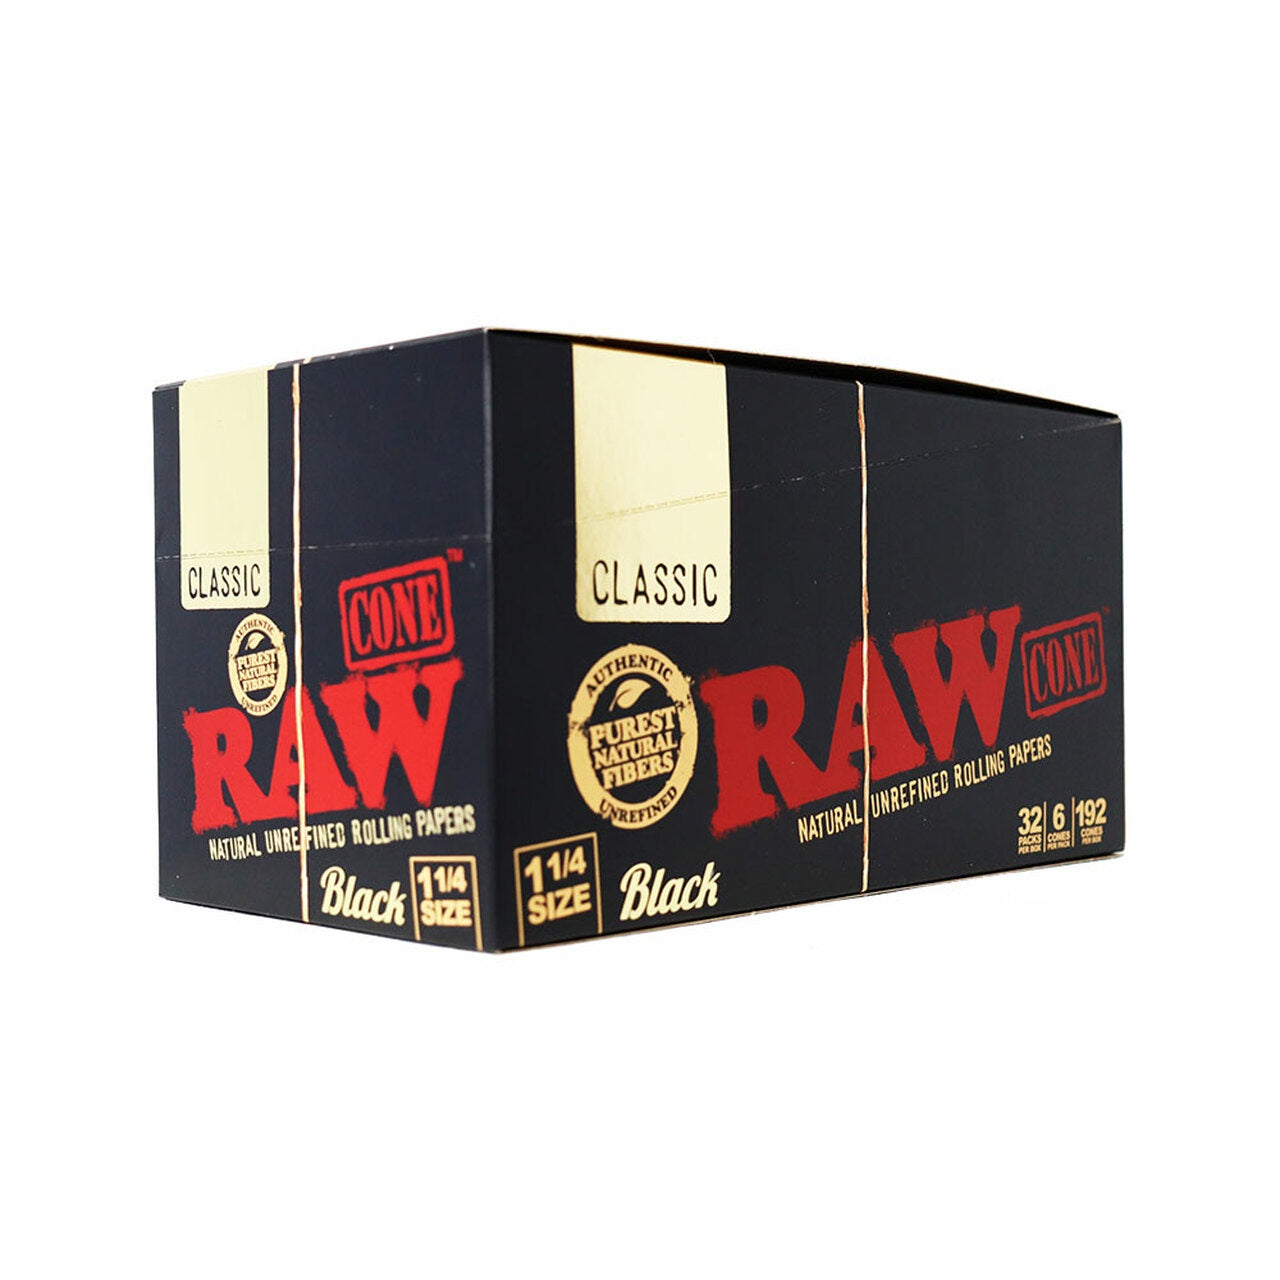 RAW Classic Black Edition Pre-Rolled Cones (King Size | 1 1/4")